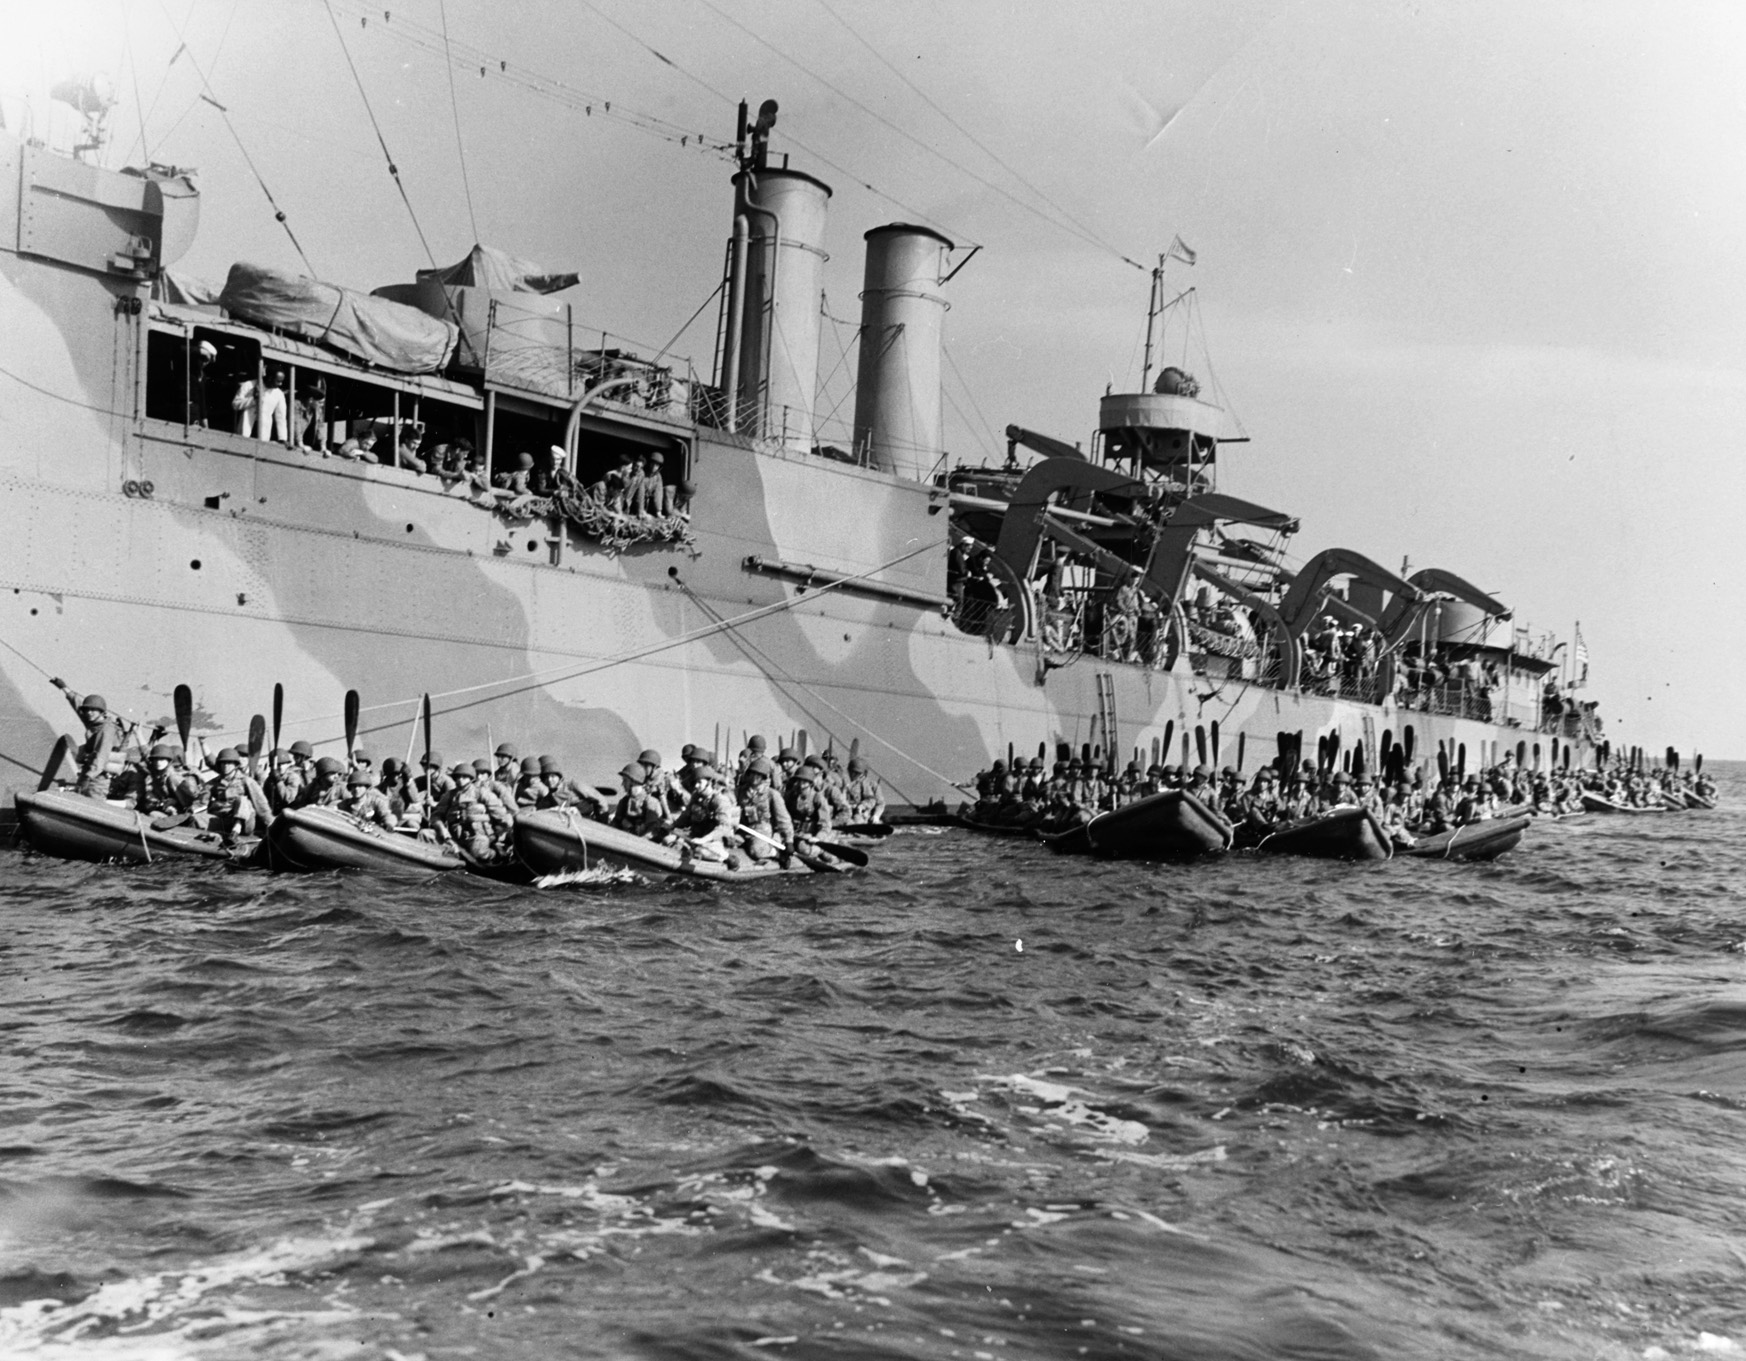 Carlson's Raiders pull away from a fast transport (APD) during training for the Makin Raid in early 1942. This exercise was to gain proficiency in the use of small rubber boats. However, heavy seas swamped several of the craft during the run-in from the submarines to the beach at Makin.